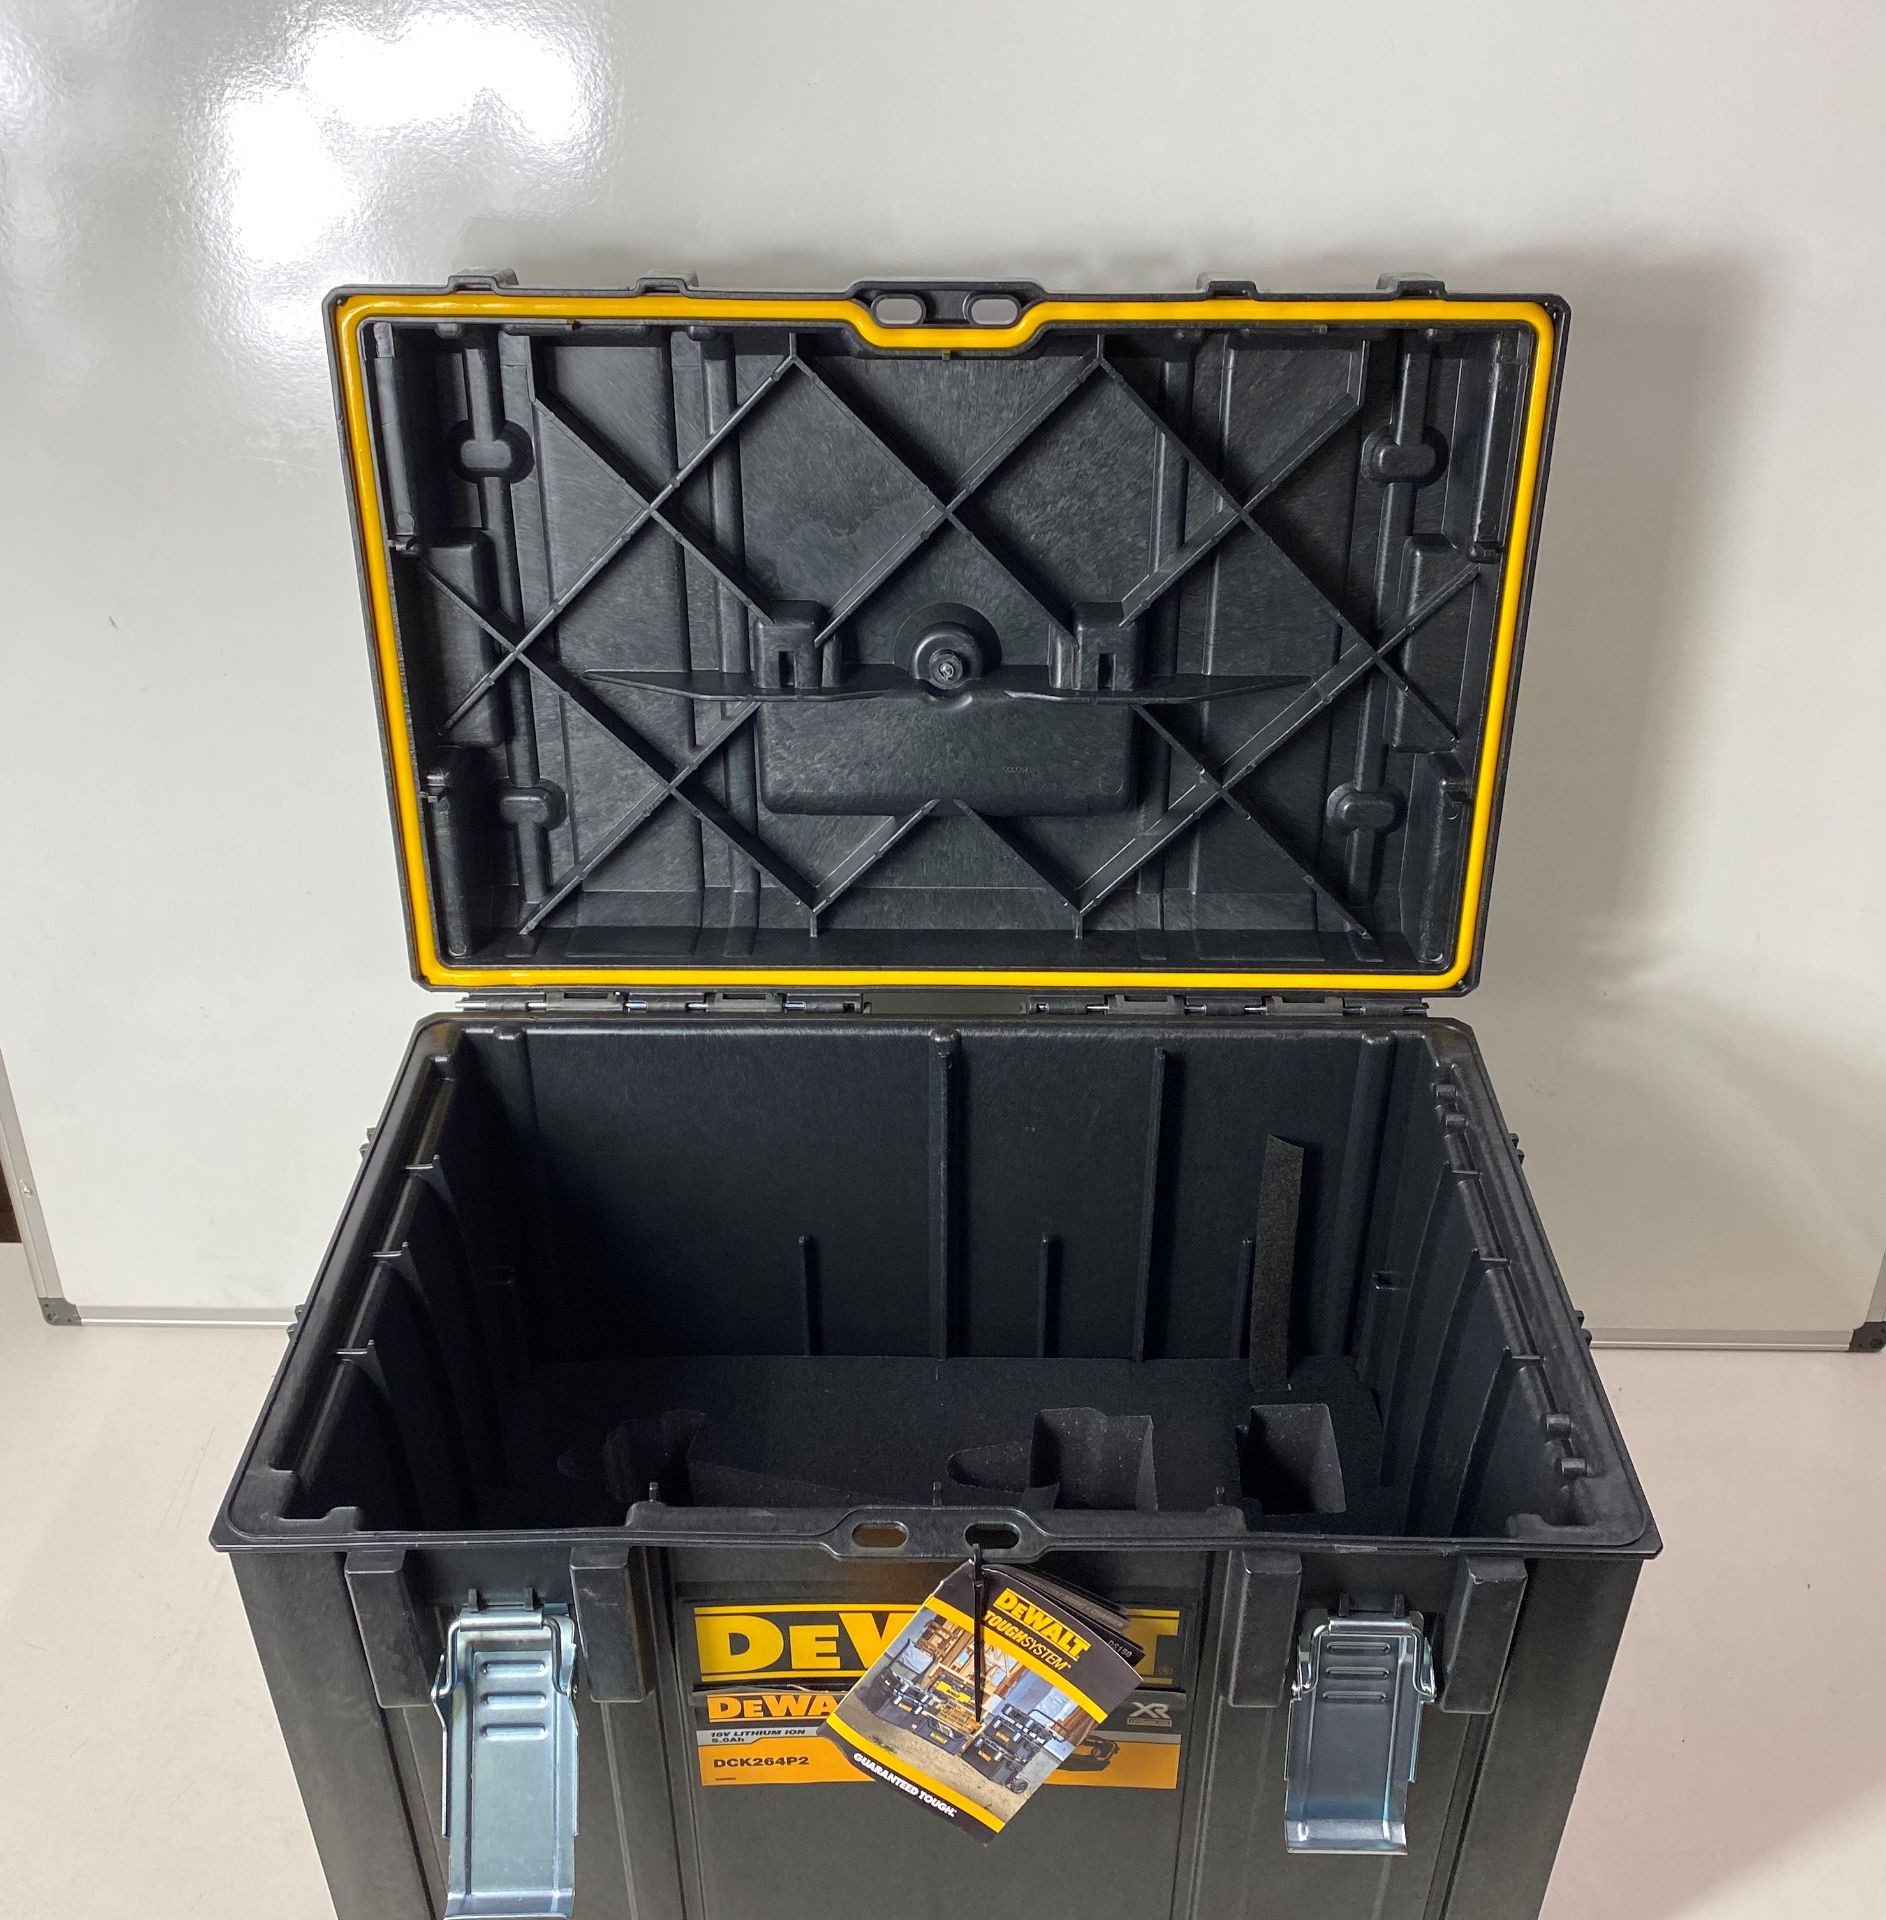 DEWALT DCK264P2 XR NAILER TWIN PACK CASE (Nailer Not Included JUST THE CASE!) - Image 3 of 3